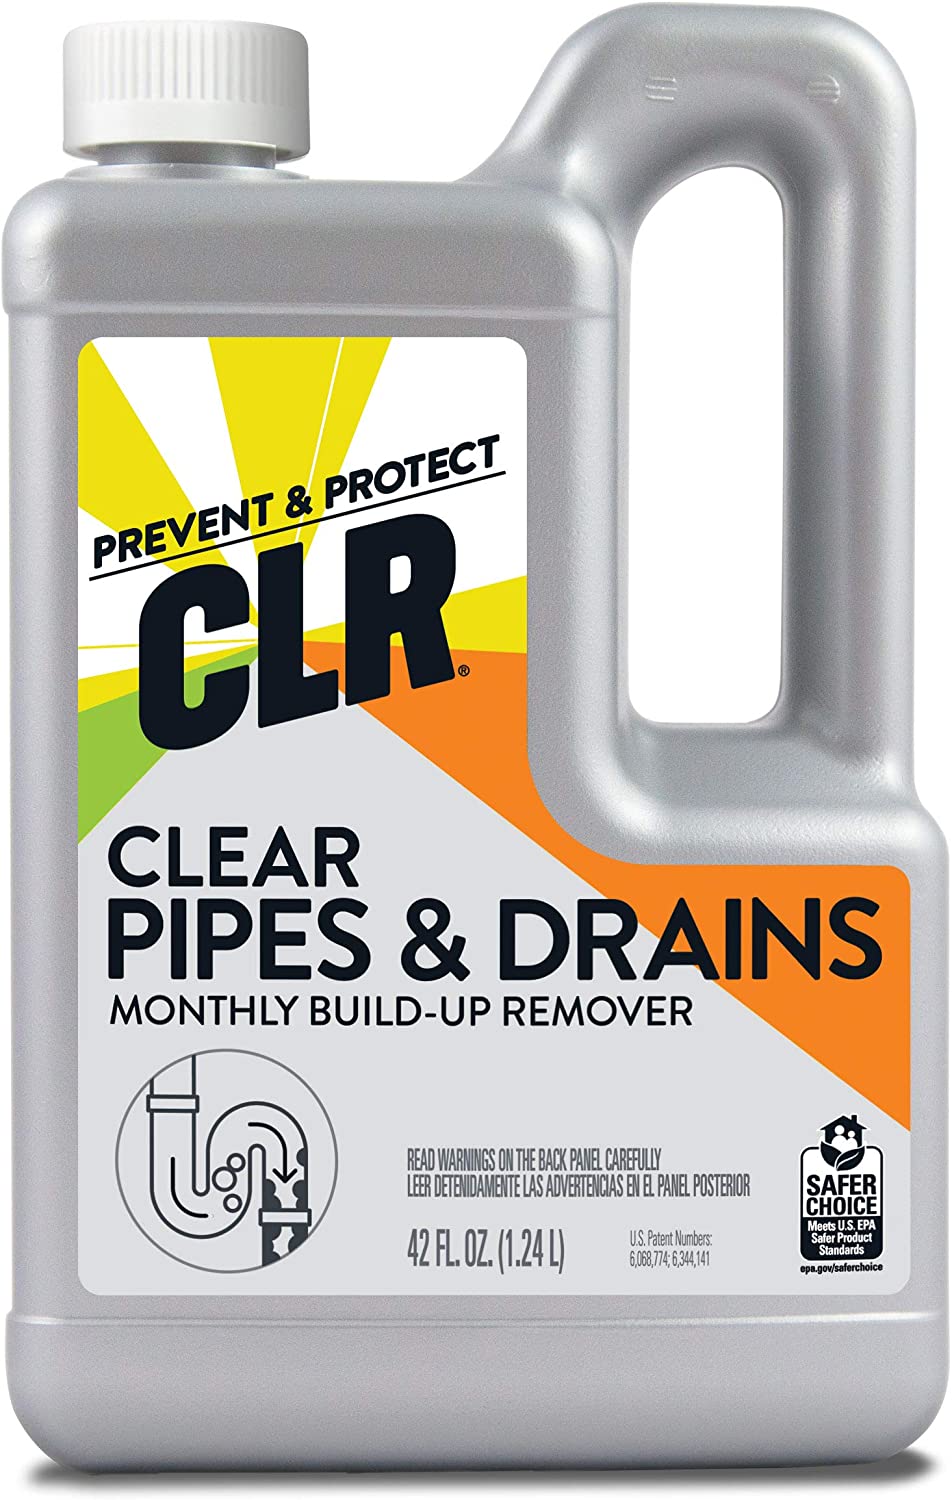 CLR Clear Pipes & Drains Clog Remover and Cleaner, For [...]